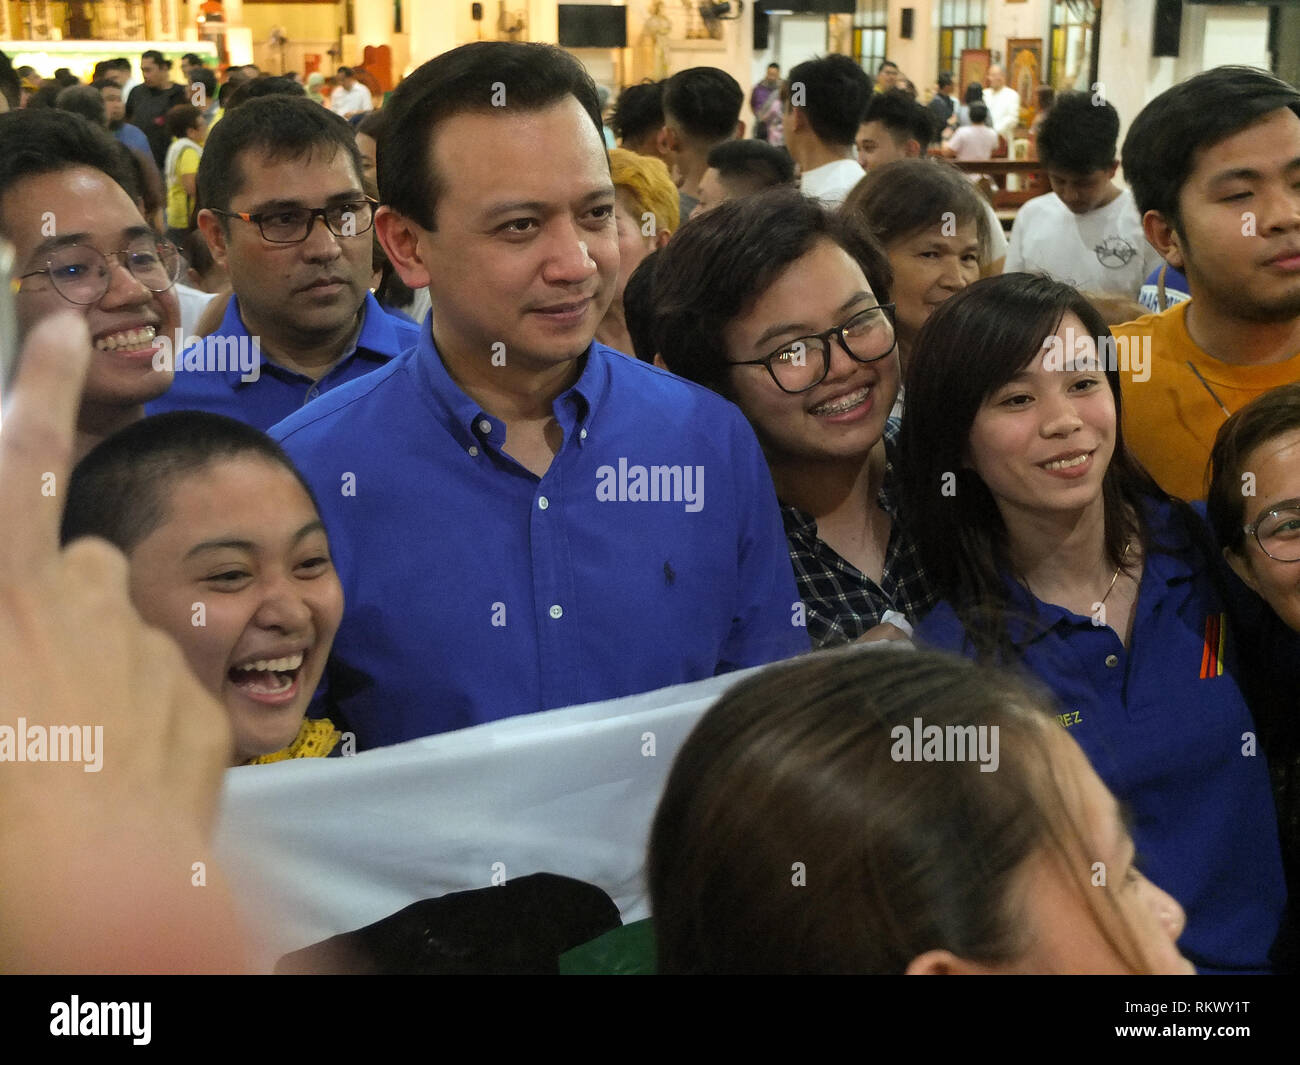 Senator Antonio Trillanes IV seen posing for a group picture with his supporters during the campaign. The Opposition Senatorial candidates, known as 'Otso Diretso' (means vote straight the 8 senatorial bets) kicked off their campaigns in Caloocan City. The Senatorial slate composed of experienced but relatively unknown opposition bets appeal to voting population that still supports the ruling Duterte Administration. Stock Photo